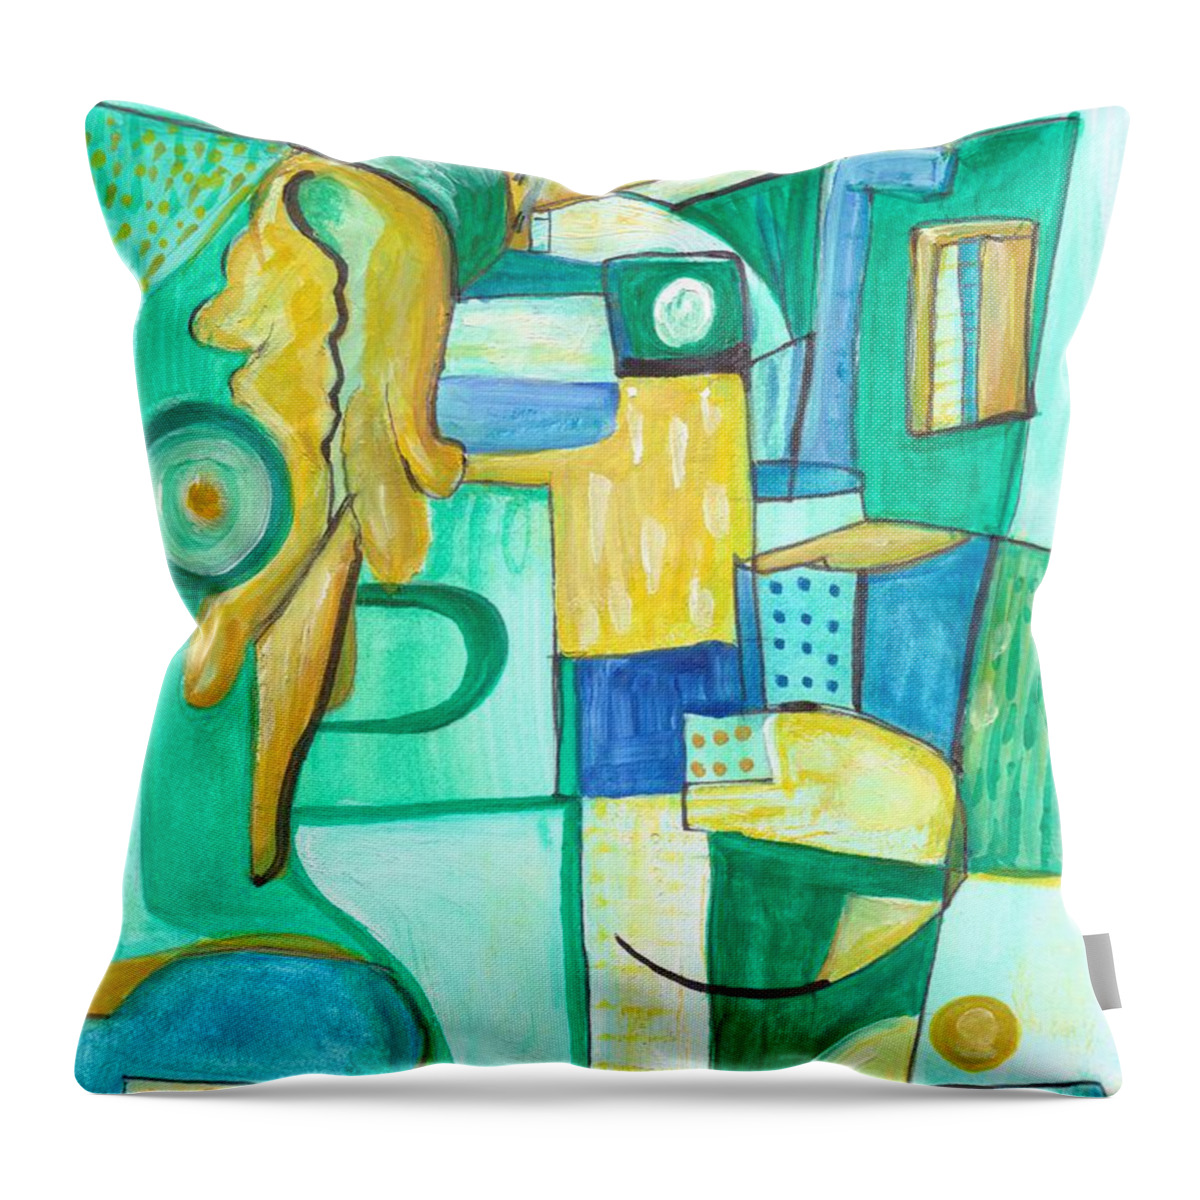 Design Throw Pillow featuring the painting From Within 9 by Stephen Lucas